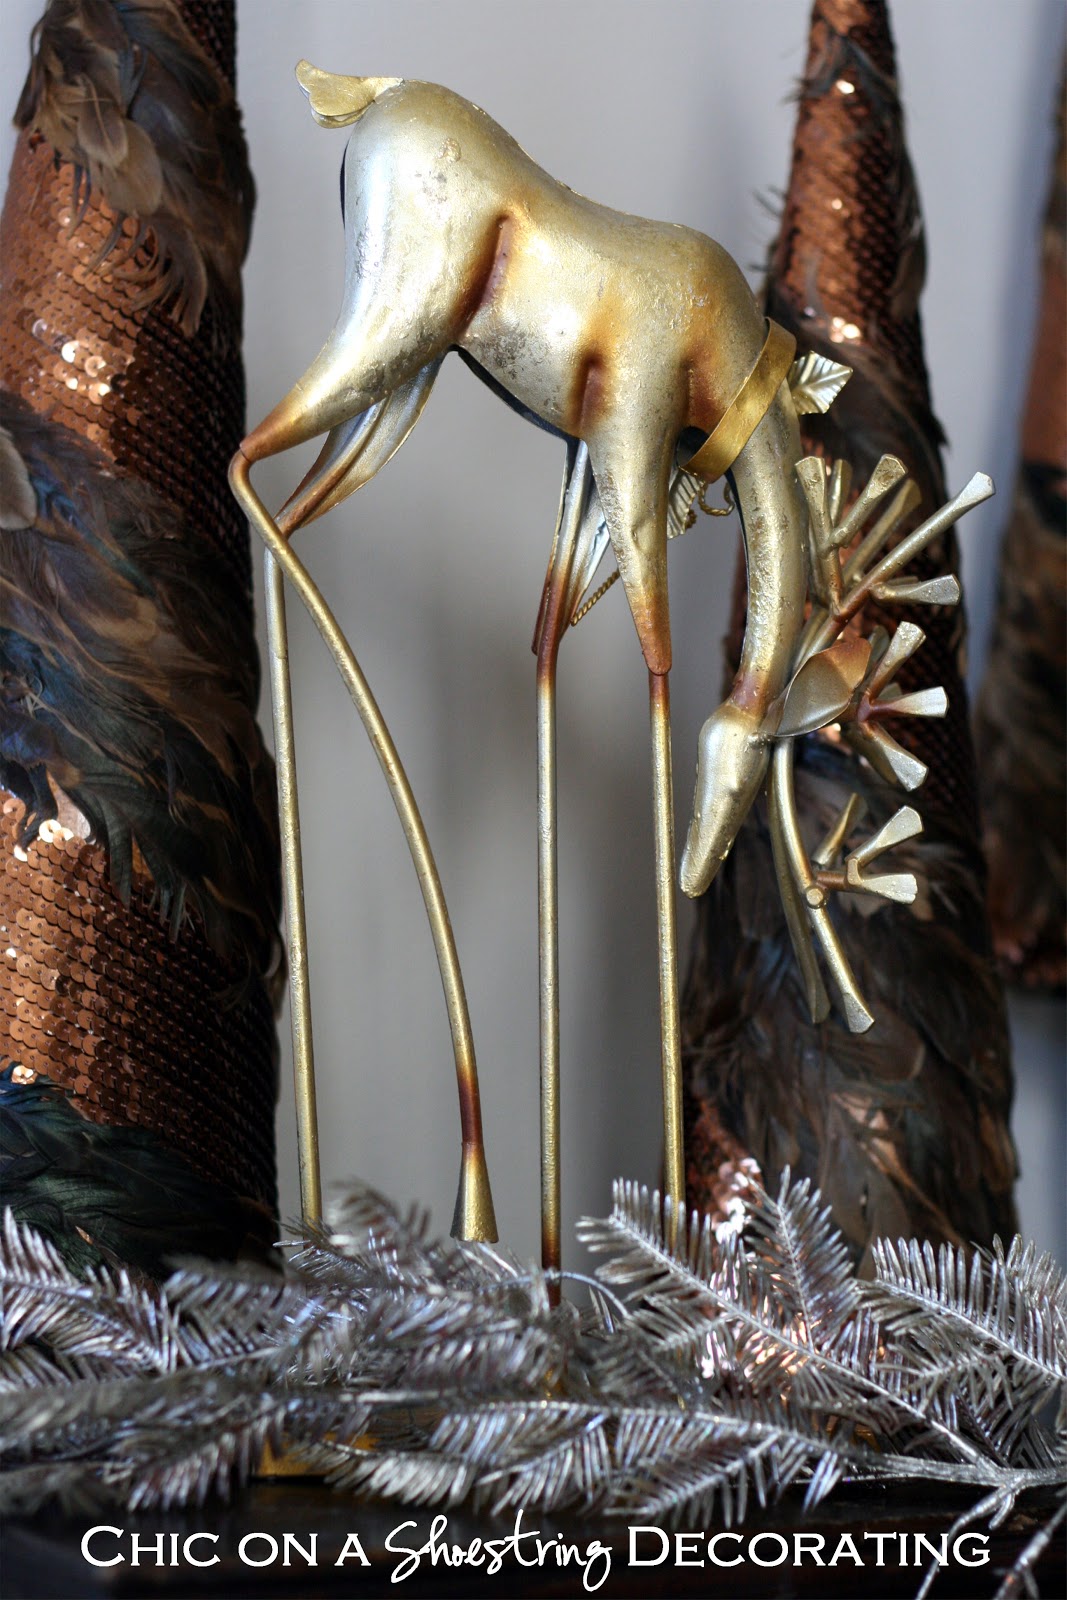 Chic on a Shoestring Decorating: Christmas Decor Tour 2012 Part 1: The Fancy Rooms1067 x 1600